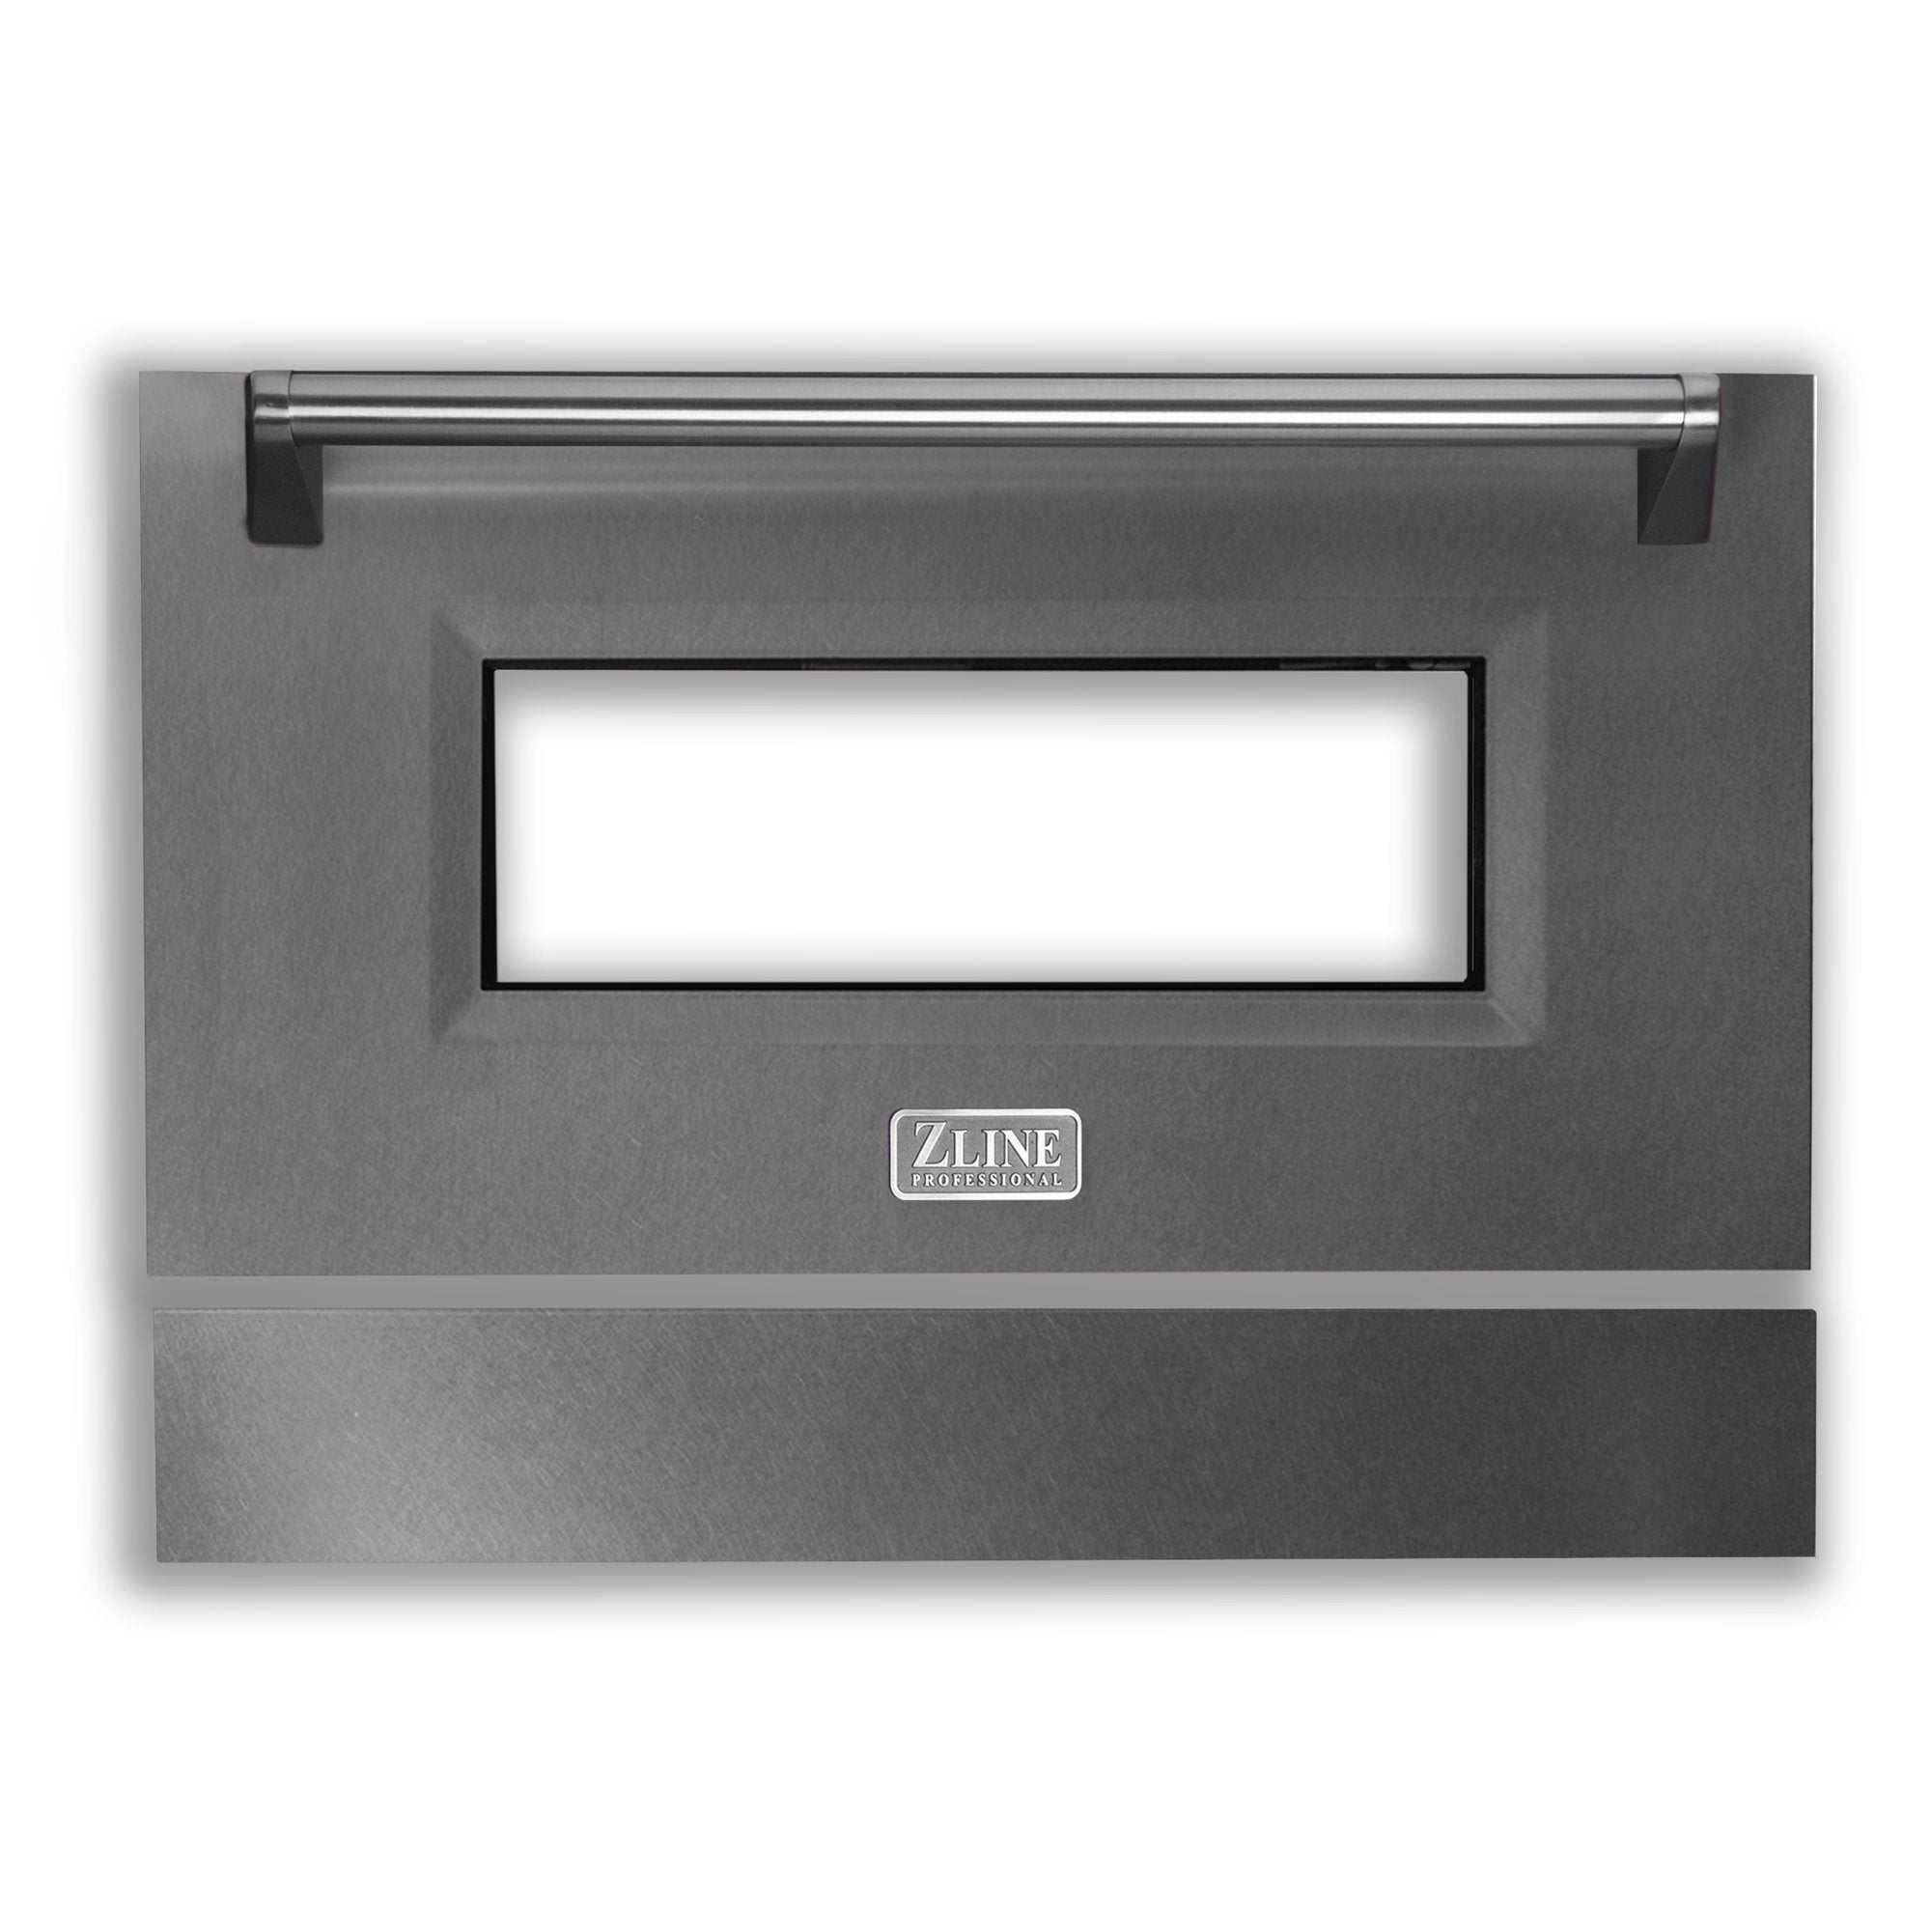 ZLINE 30 in. DuraSnow Stainless Steel Range Door for RA and RG and RAIND Models (RA-DR-SN-30)